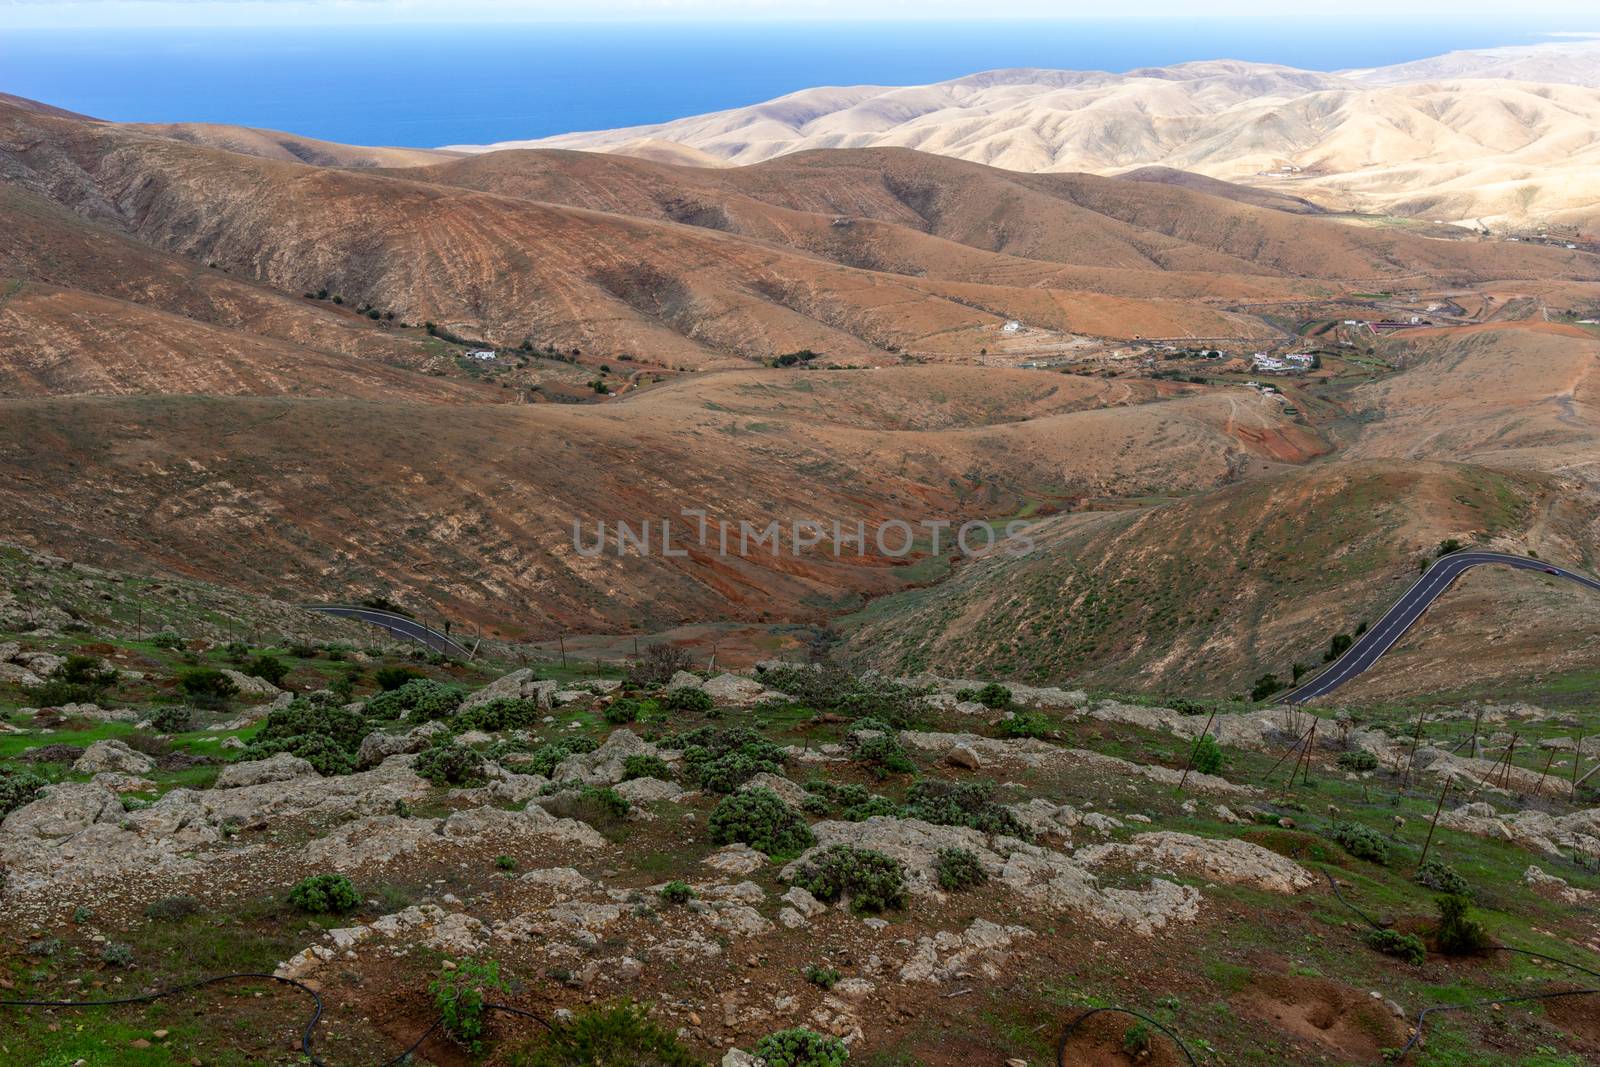 Panoramic view at landscape from viewpoint Mirador Morro Velosa  by reinerc